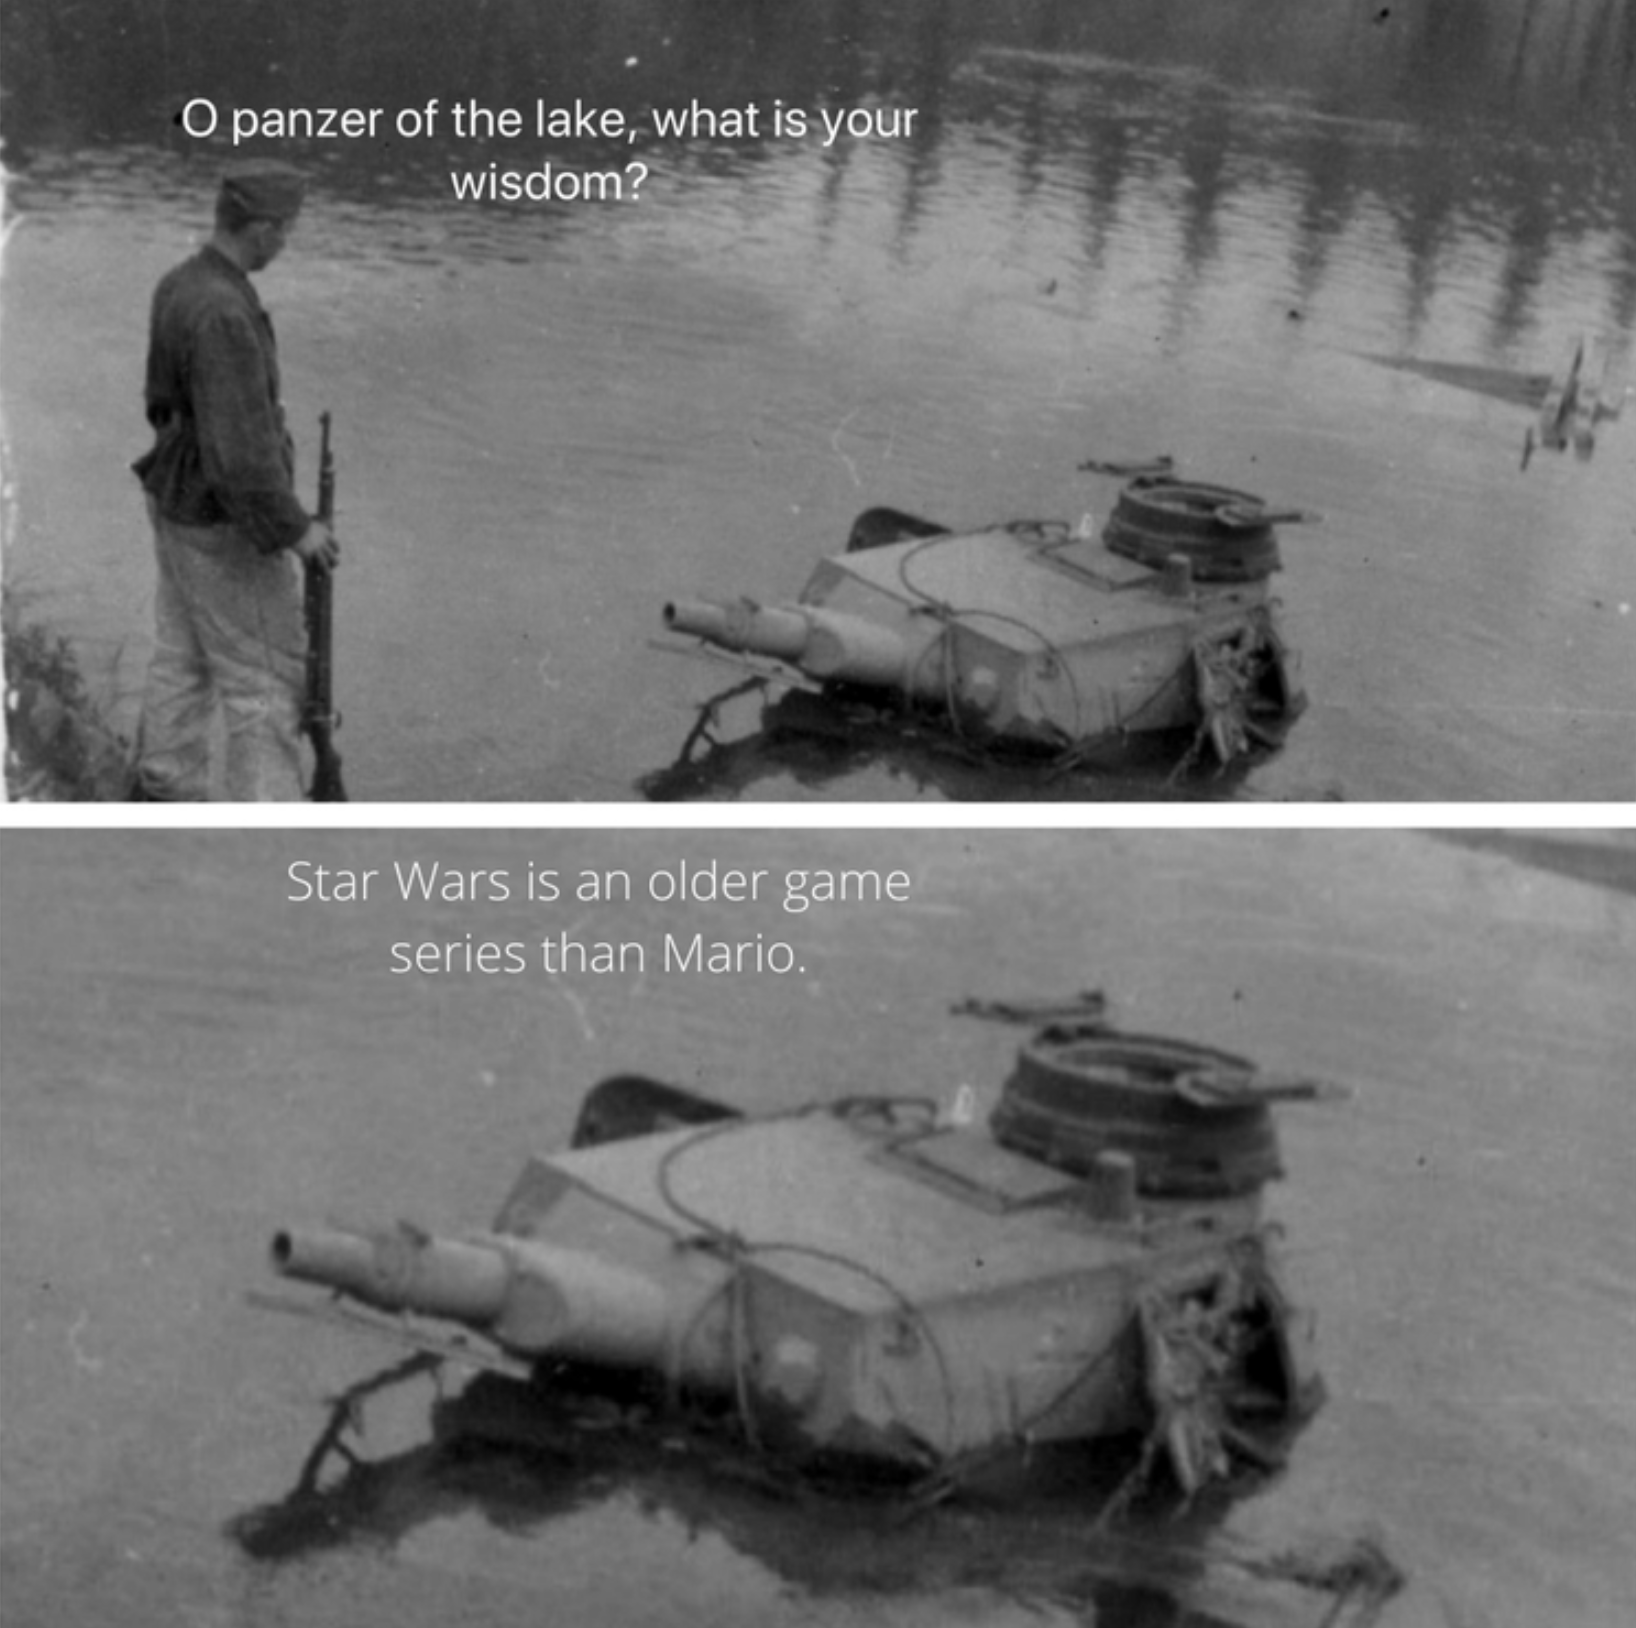 funny gaming memes  - o panzer of the lake - O panzer of the lake, what is your wisdom? Star Wars is an older game series than Mario